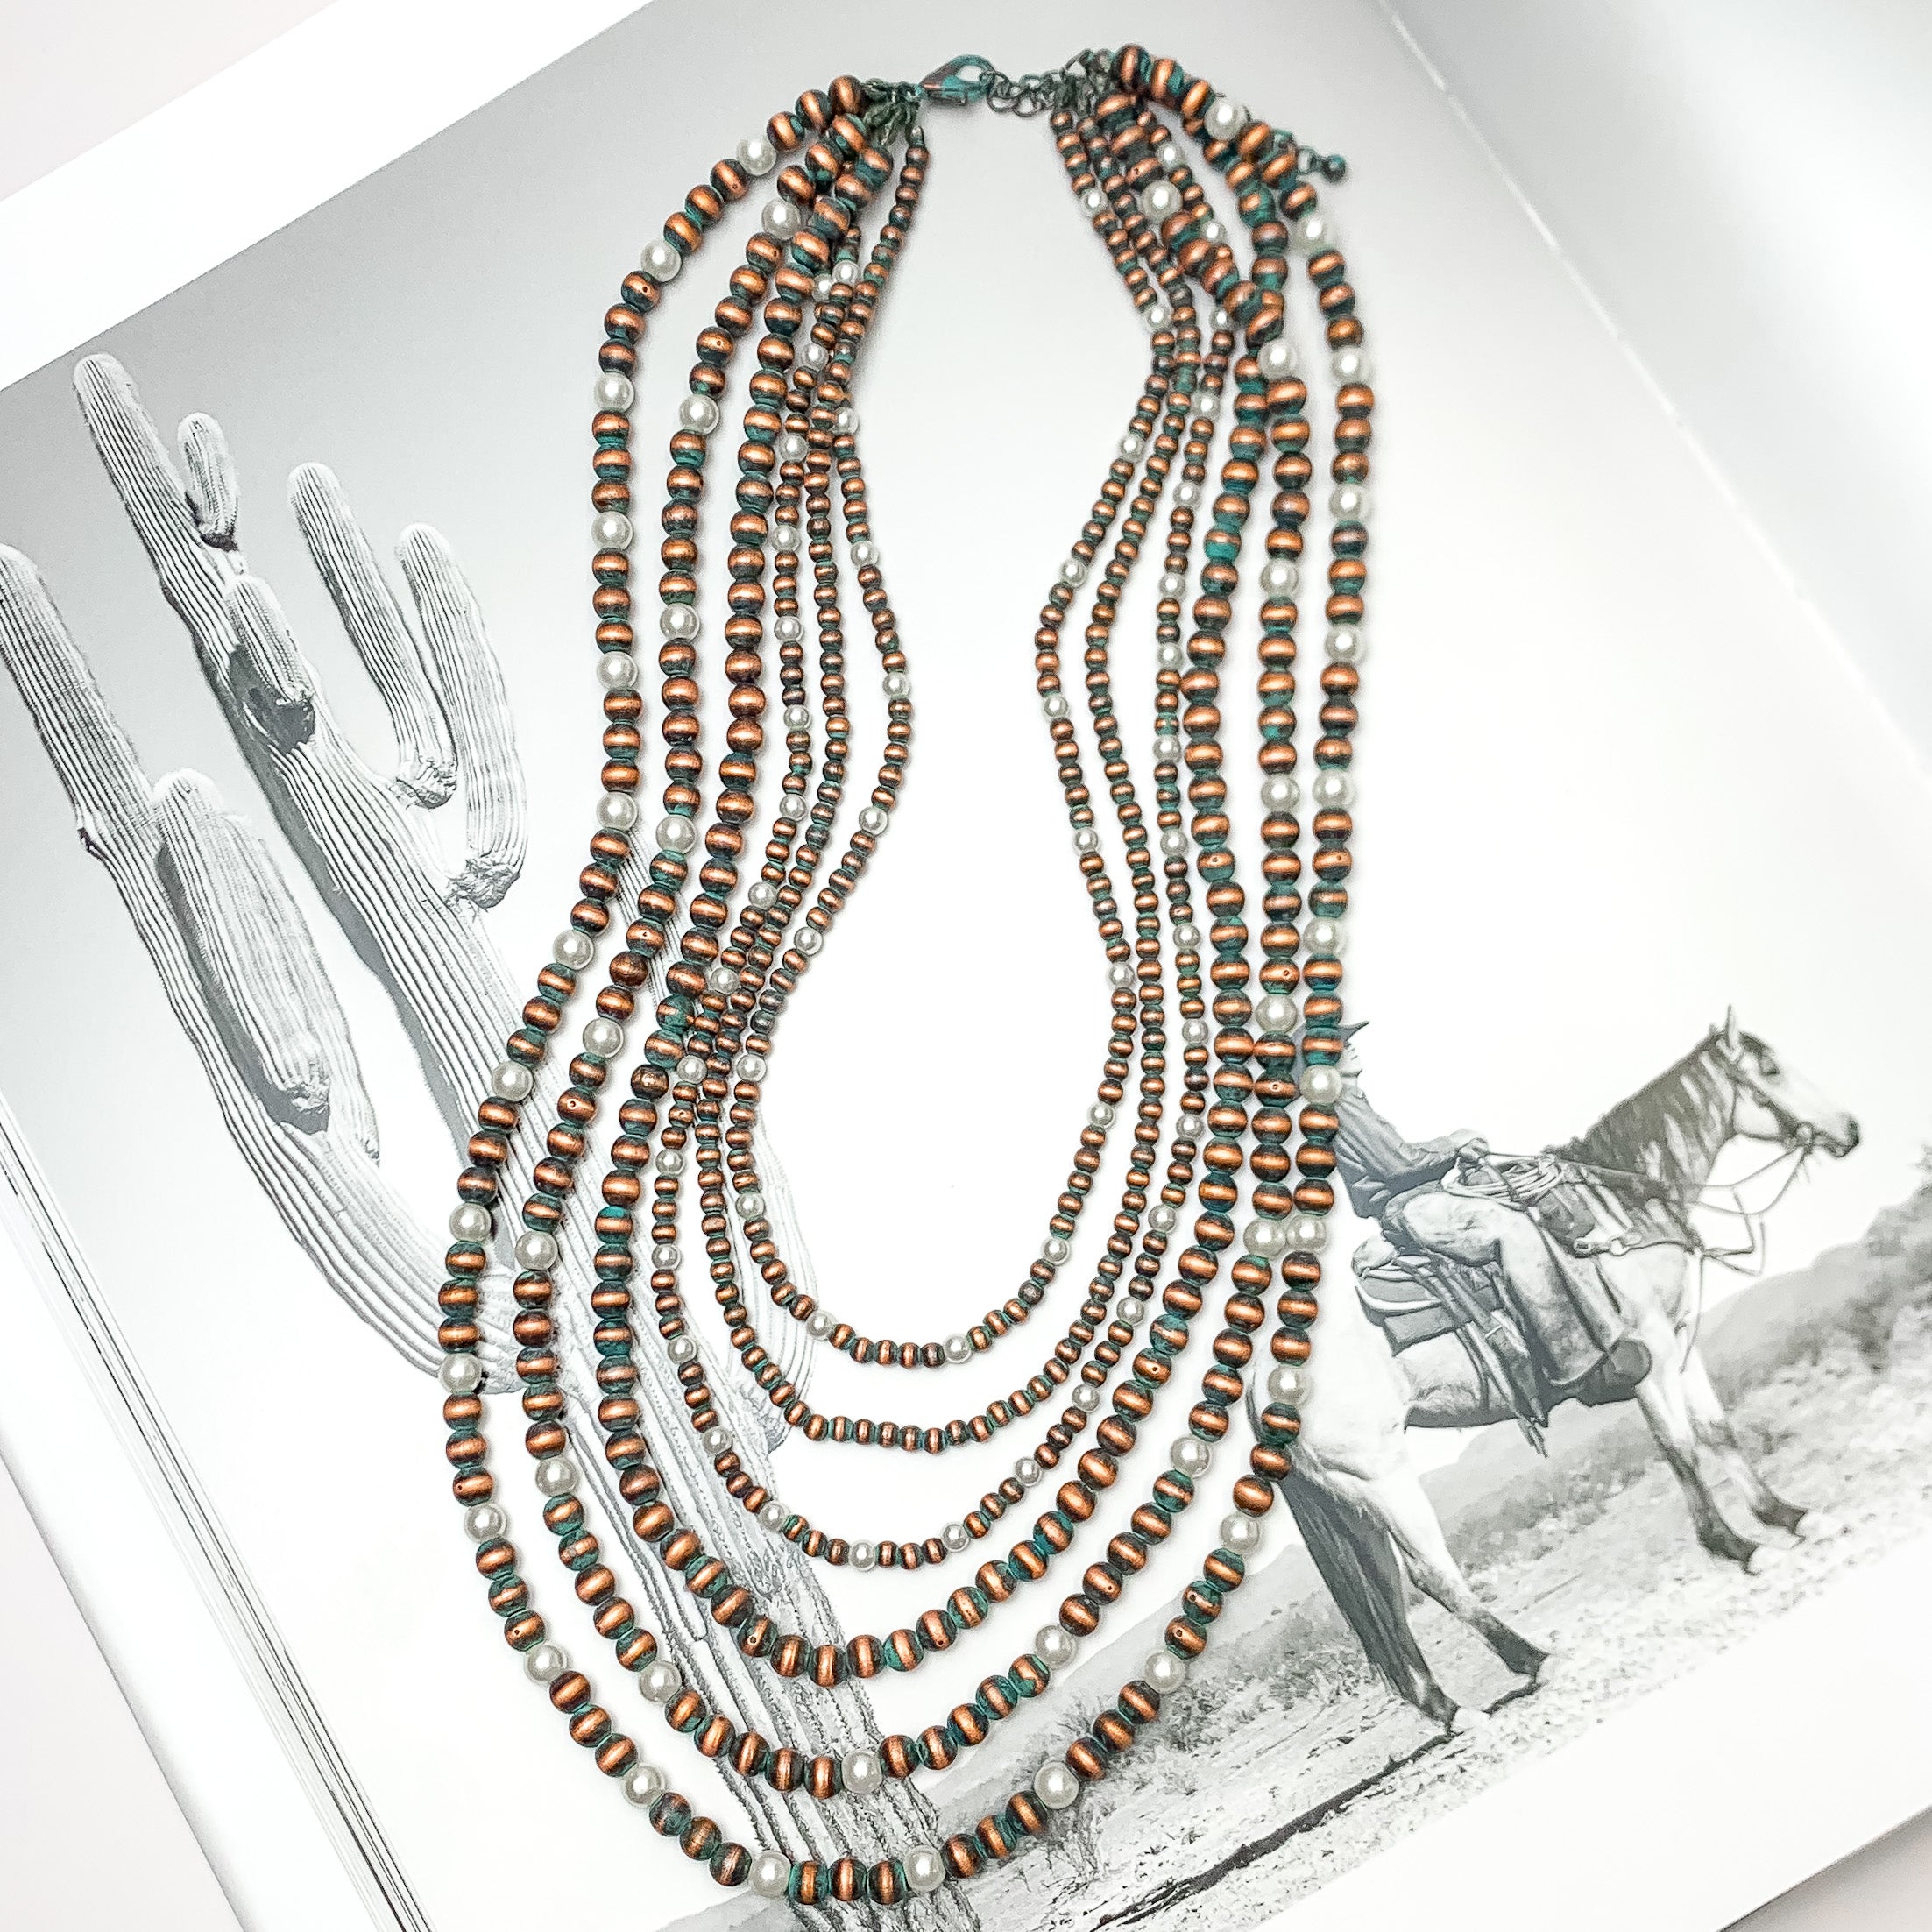 Six Strand Faux Navajo Pearl Necklace in Patina Tone with White Pearl Beads. Pictured on a western background.